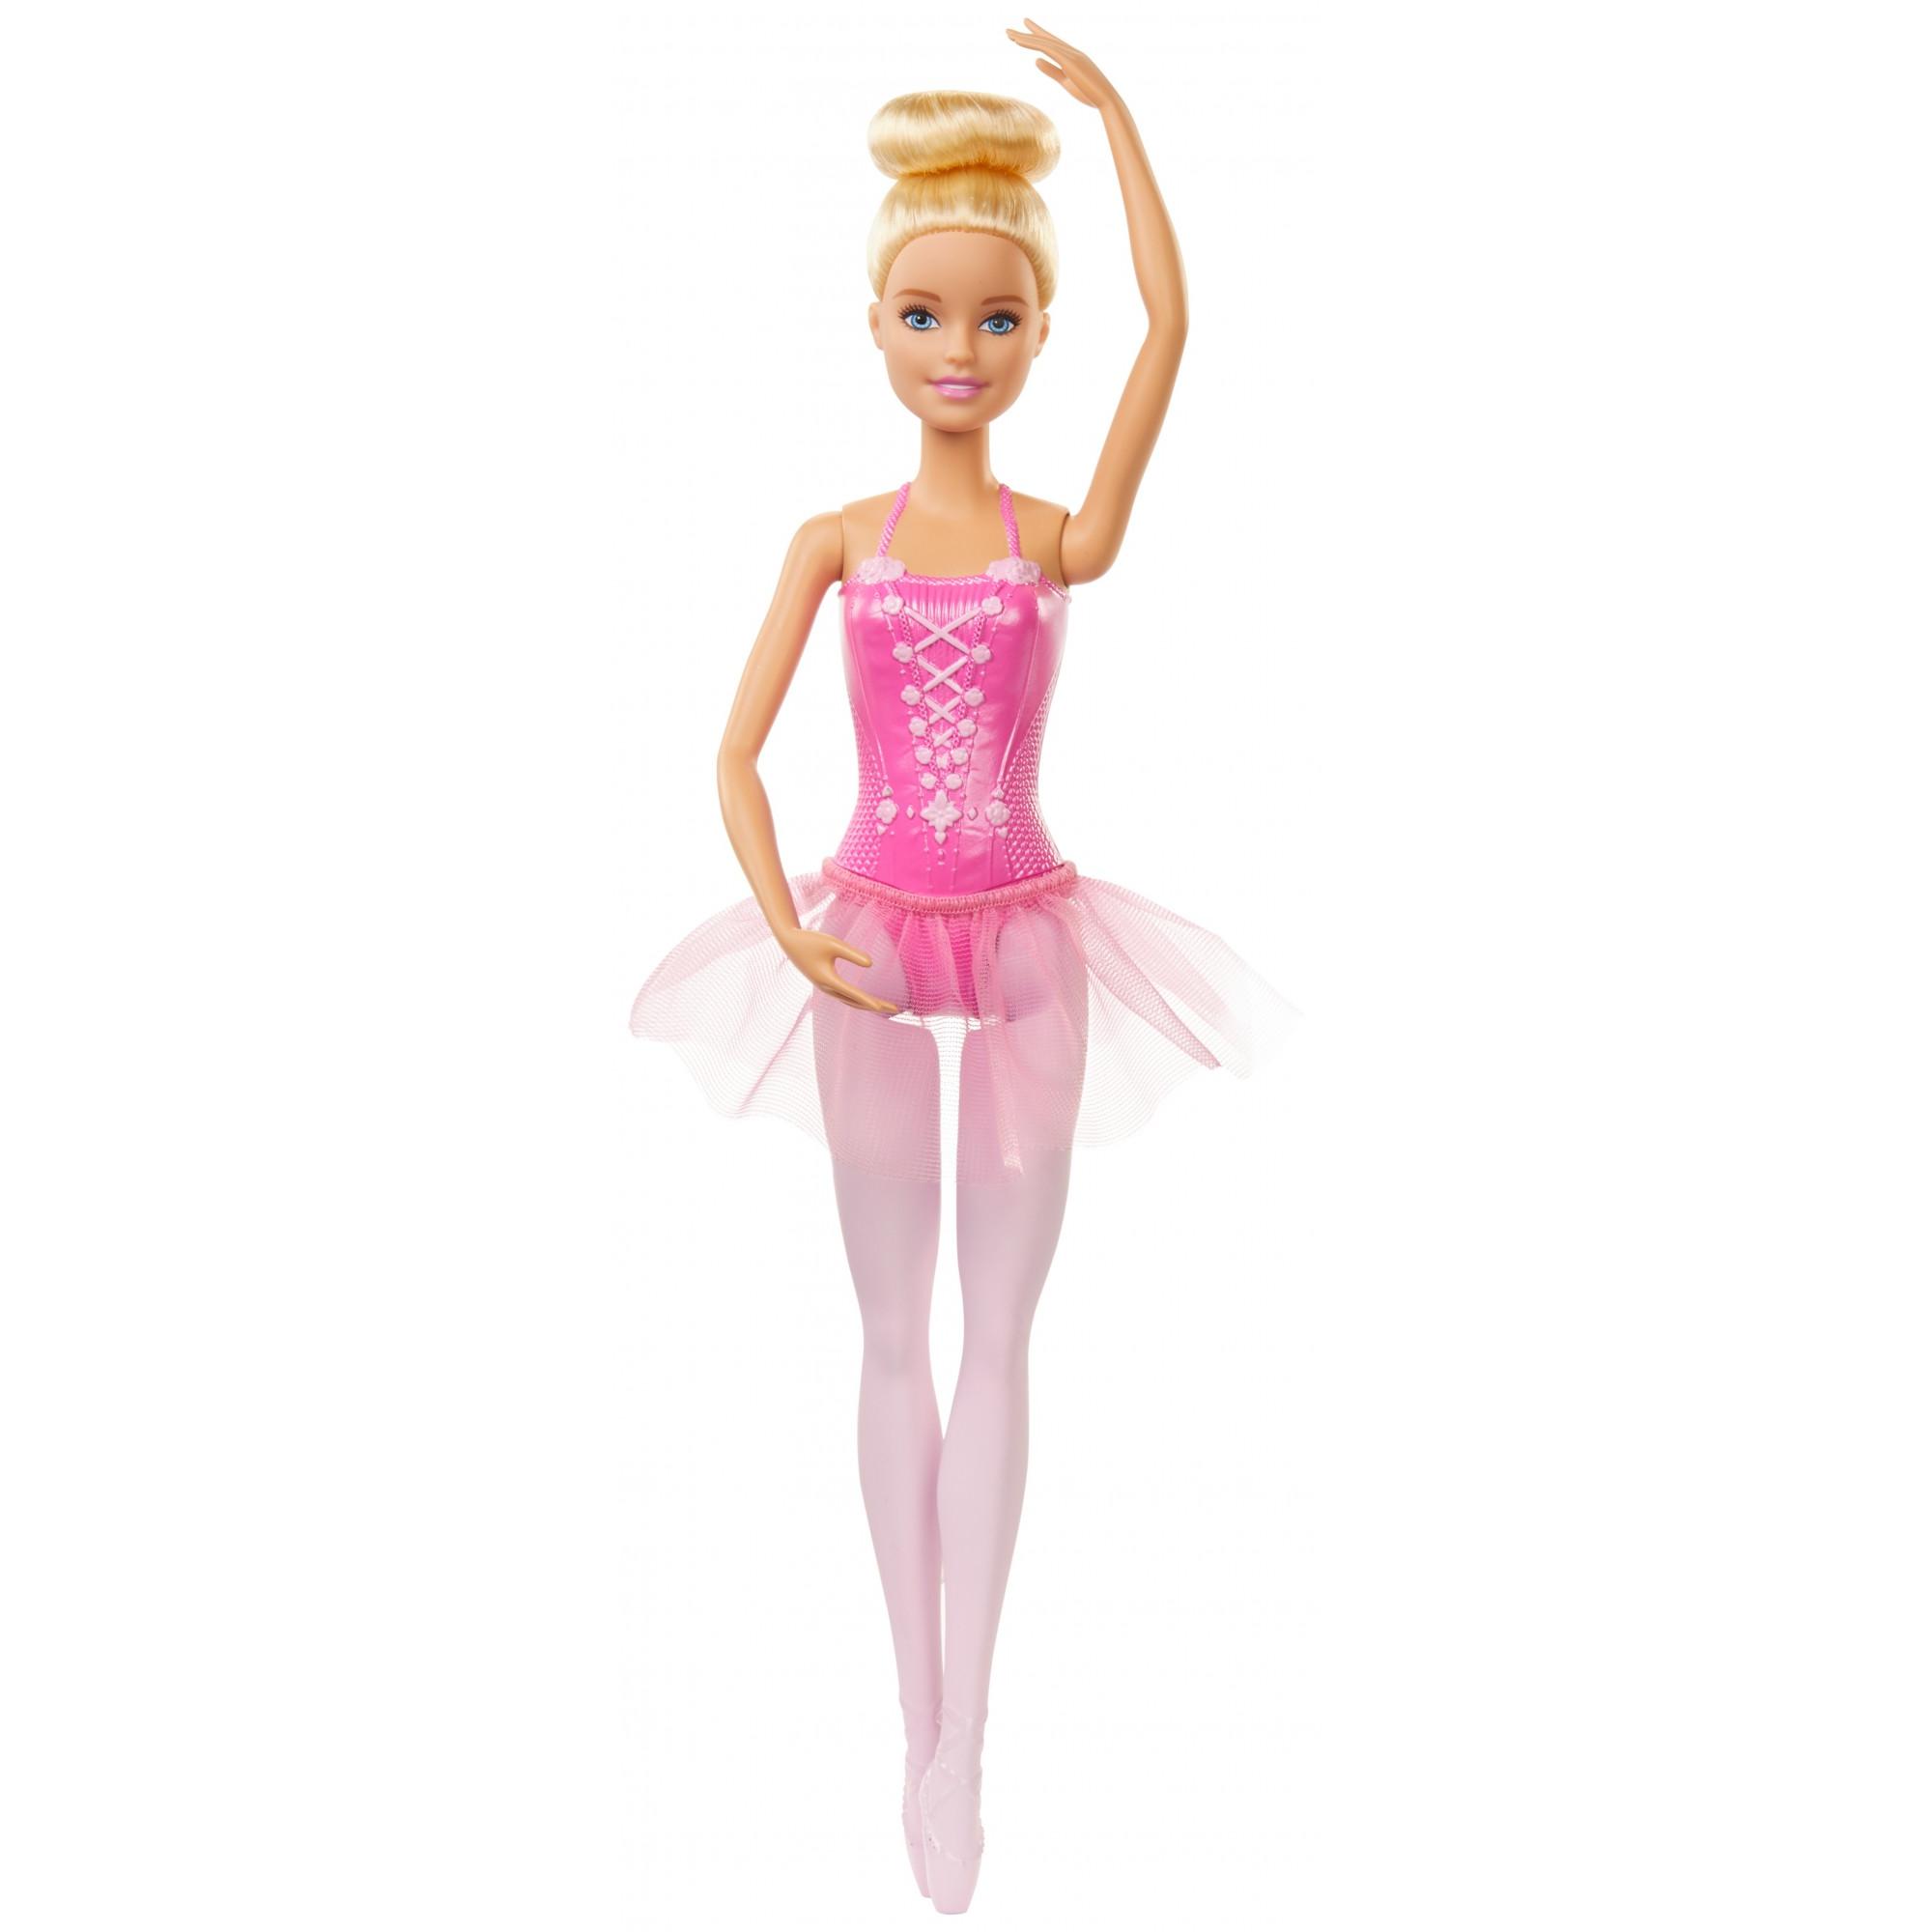 Barbie Ballerina Doll with Tutu, Ballet Arms & Sculpted Toe Shoes (Styles May Vary) - image 2 of 4